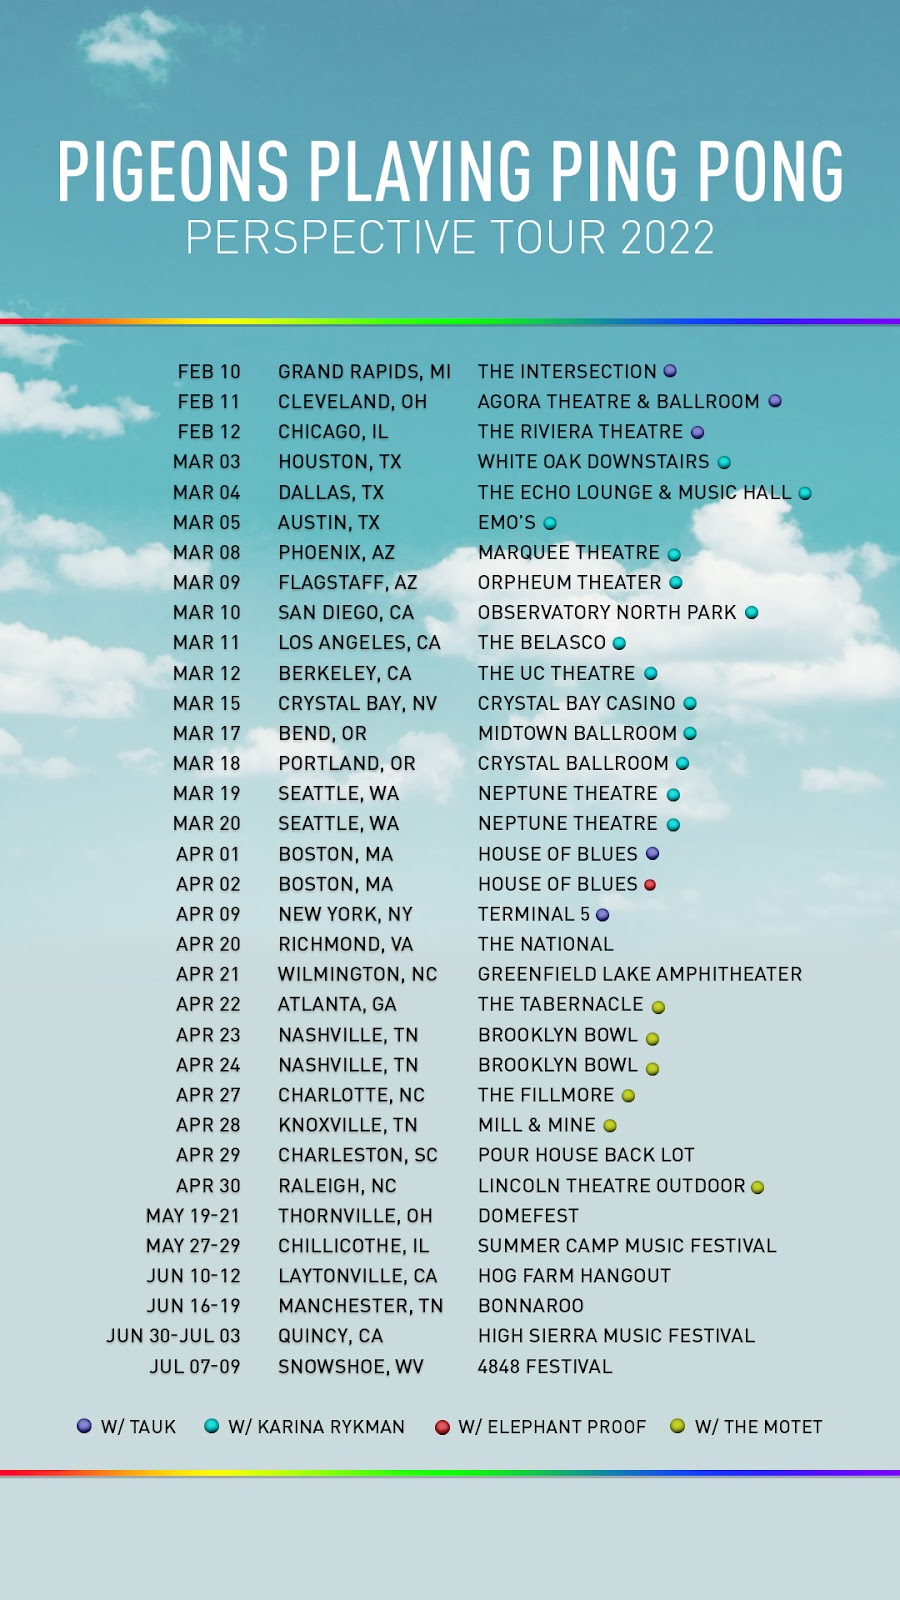 more than thirty shows scheduled nationwide.